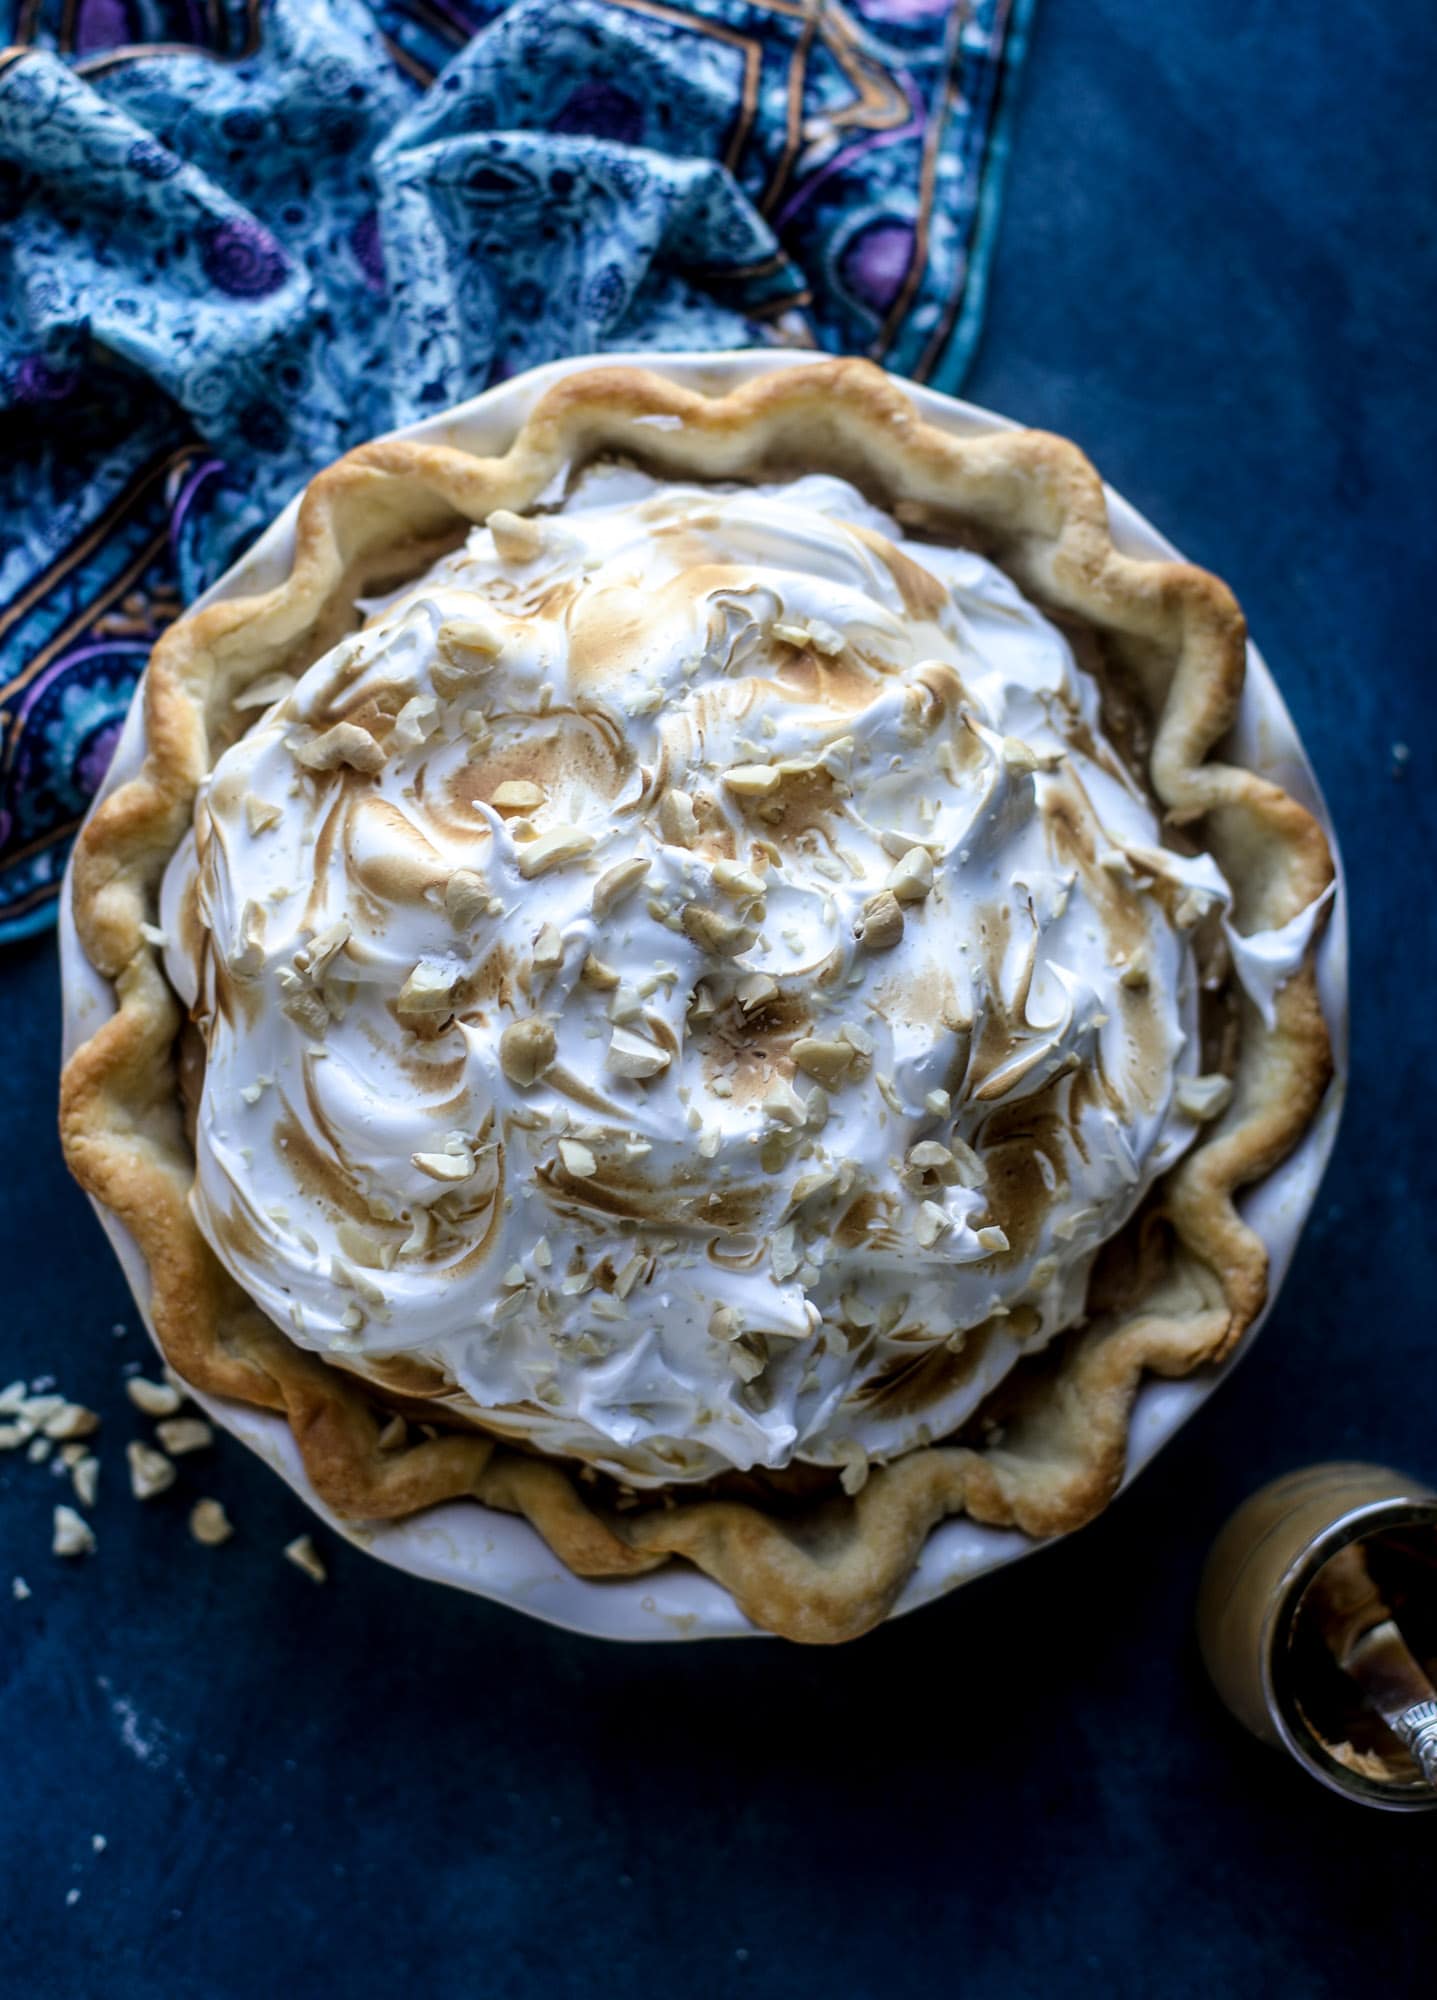 This peanut butter pie recipe is almost identical to the one that my grandmother made when I was a crust. Flaky pastry crust is what makes this pie different, along with a creamy no-bake peanut butter filling that is rich and decadent! I howsweeteats.com #peanutbutter #pie